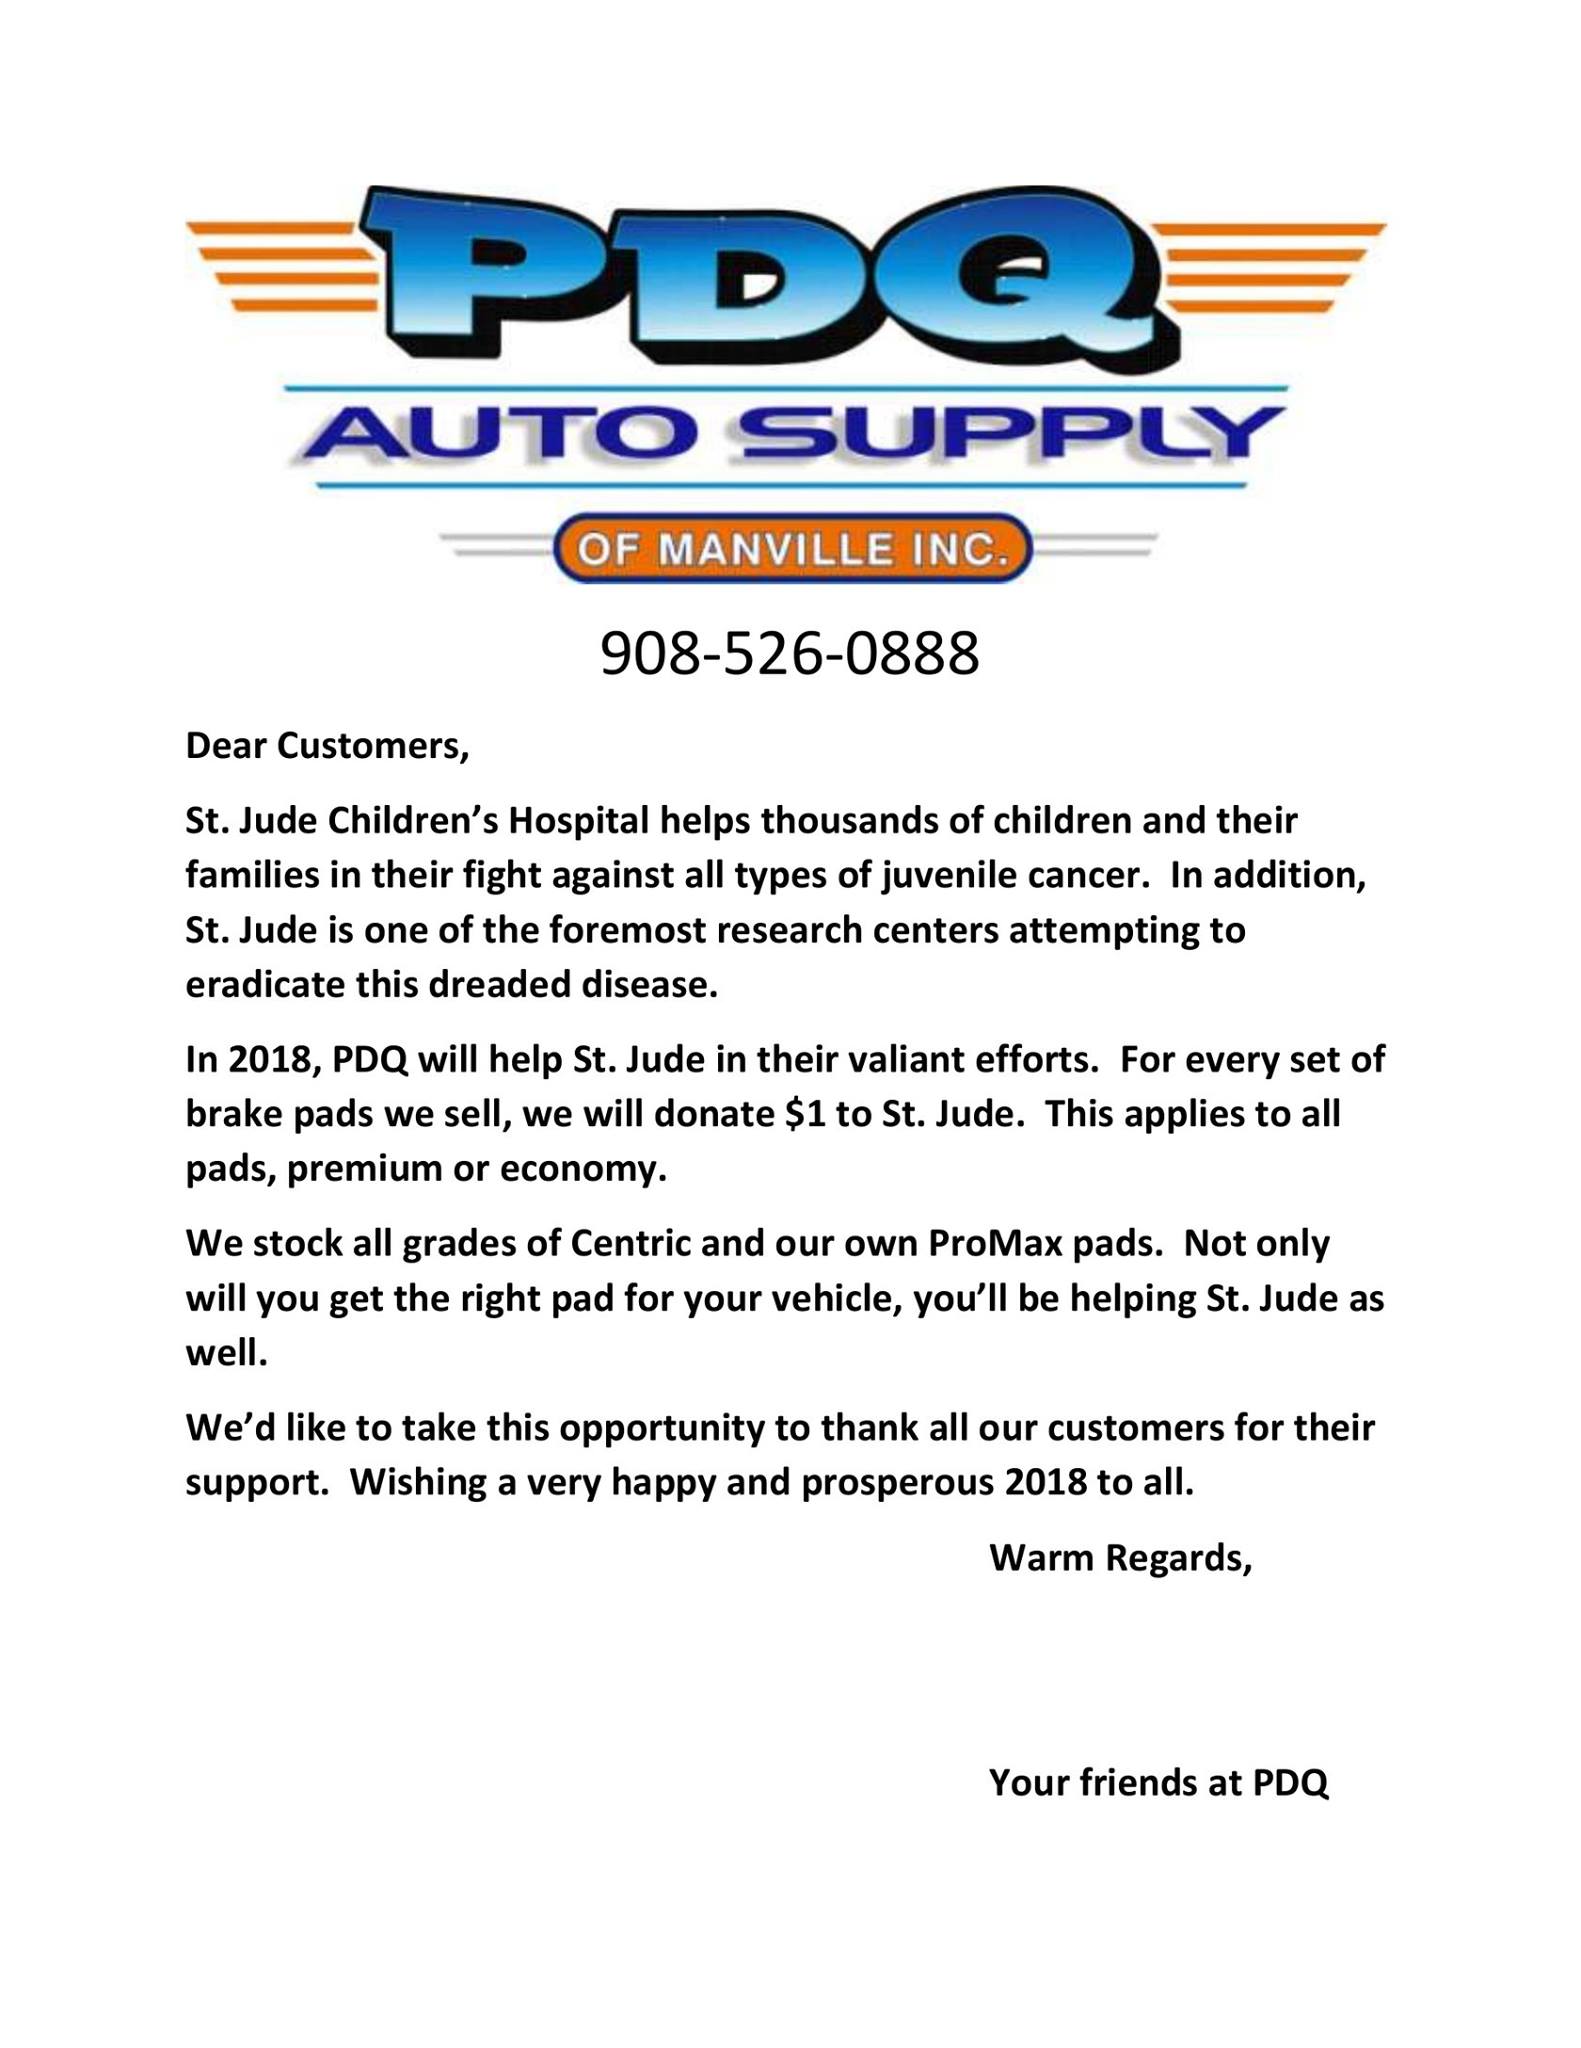 PDQ Auto Supply of Manville